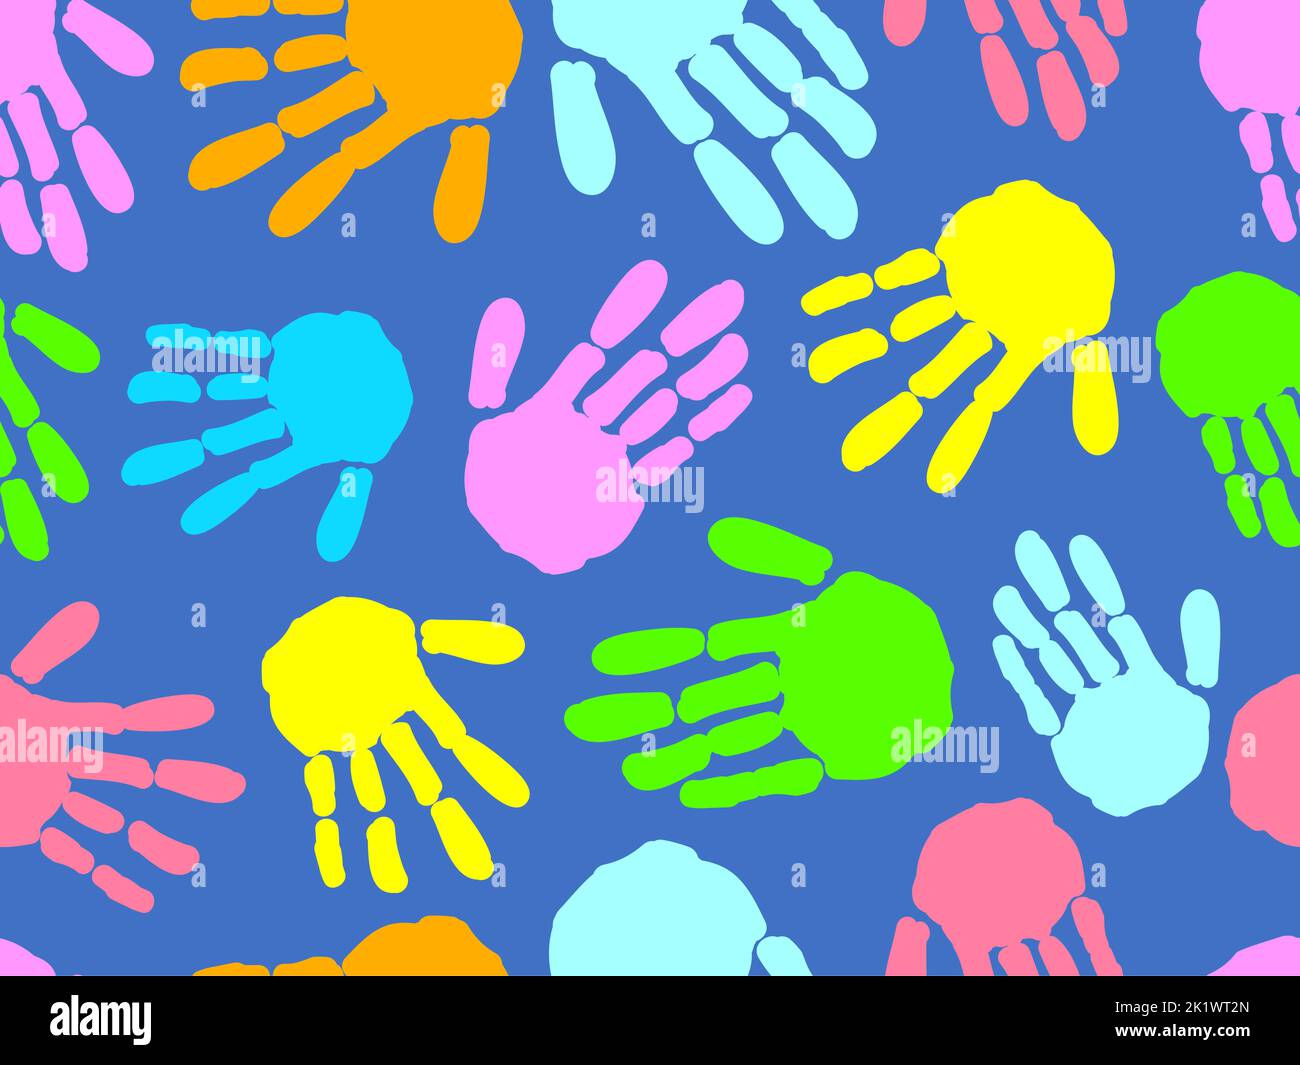 Seamless Background Illustration of Hand Prints of Different Colors. Diversity Stock Photo